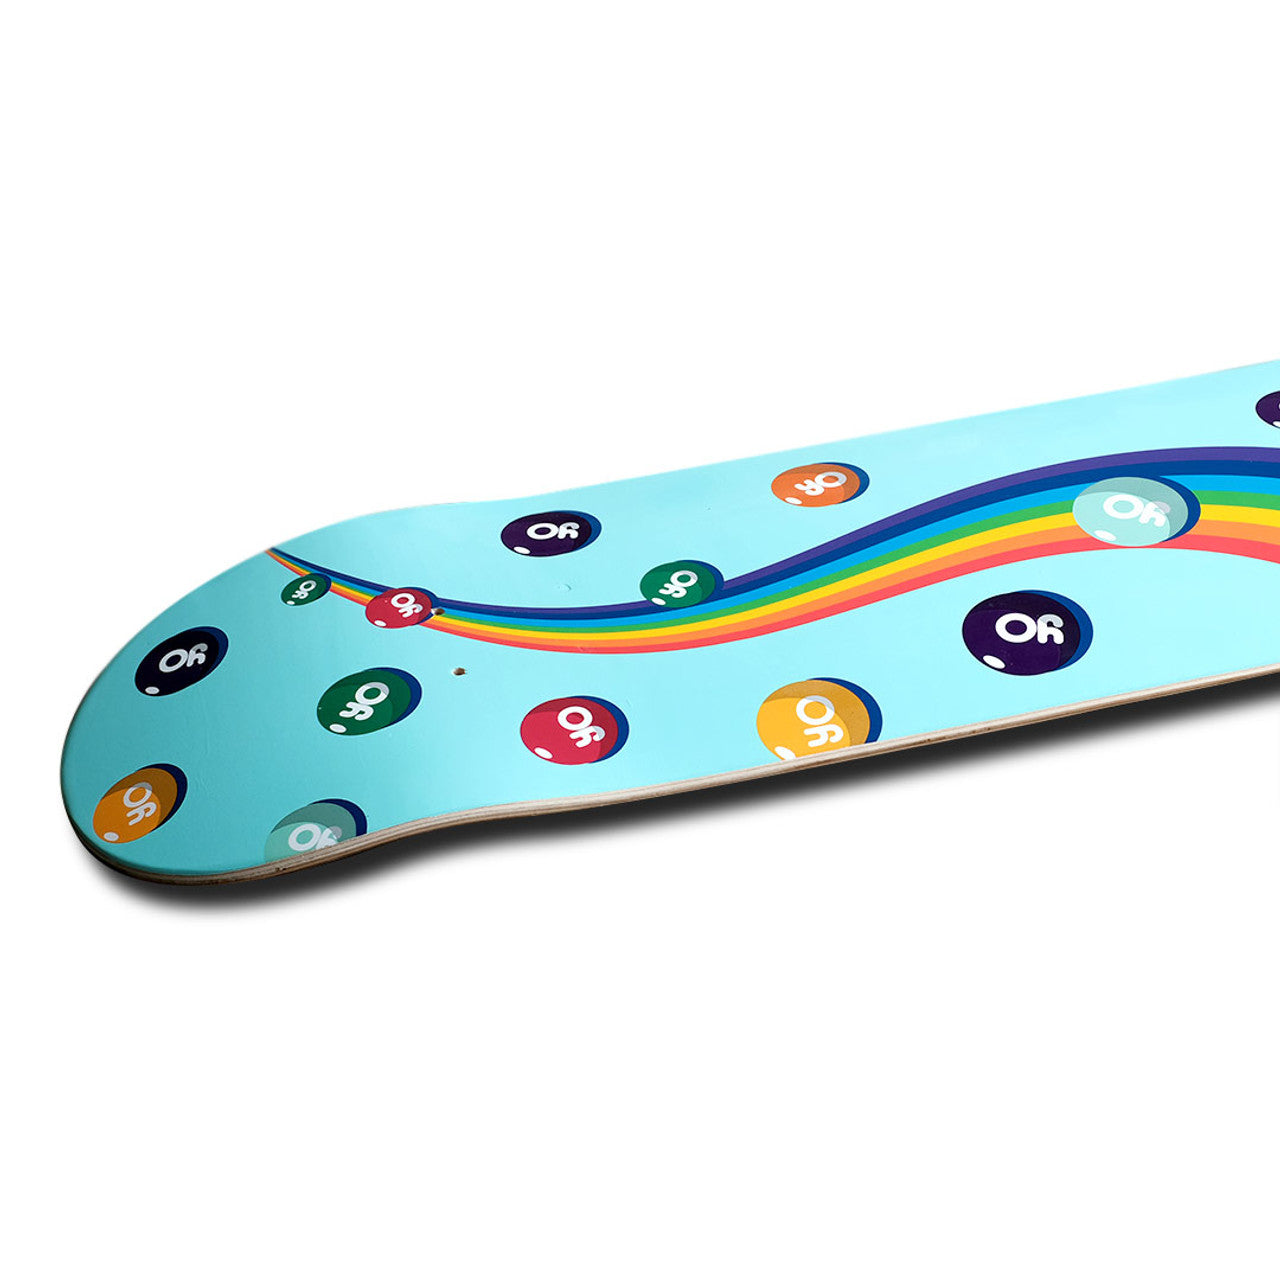 Yocaher Graphic Skateboard Deck  - CANDY Series - Sweet